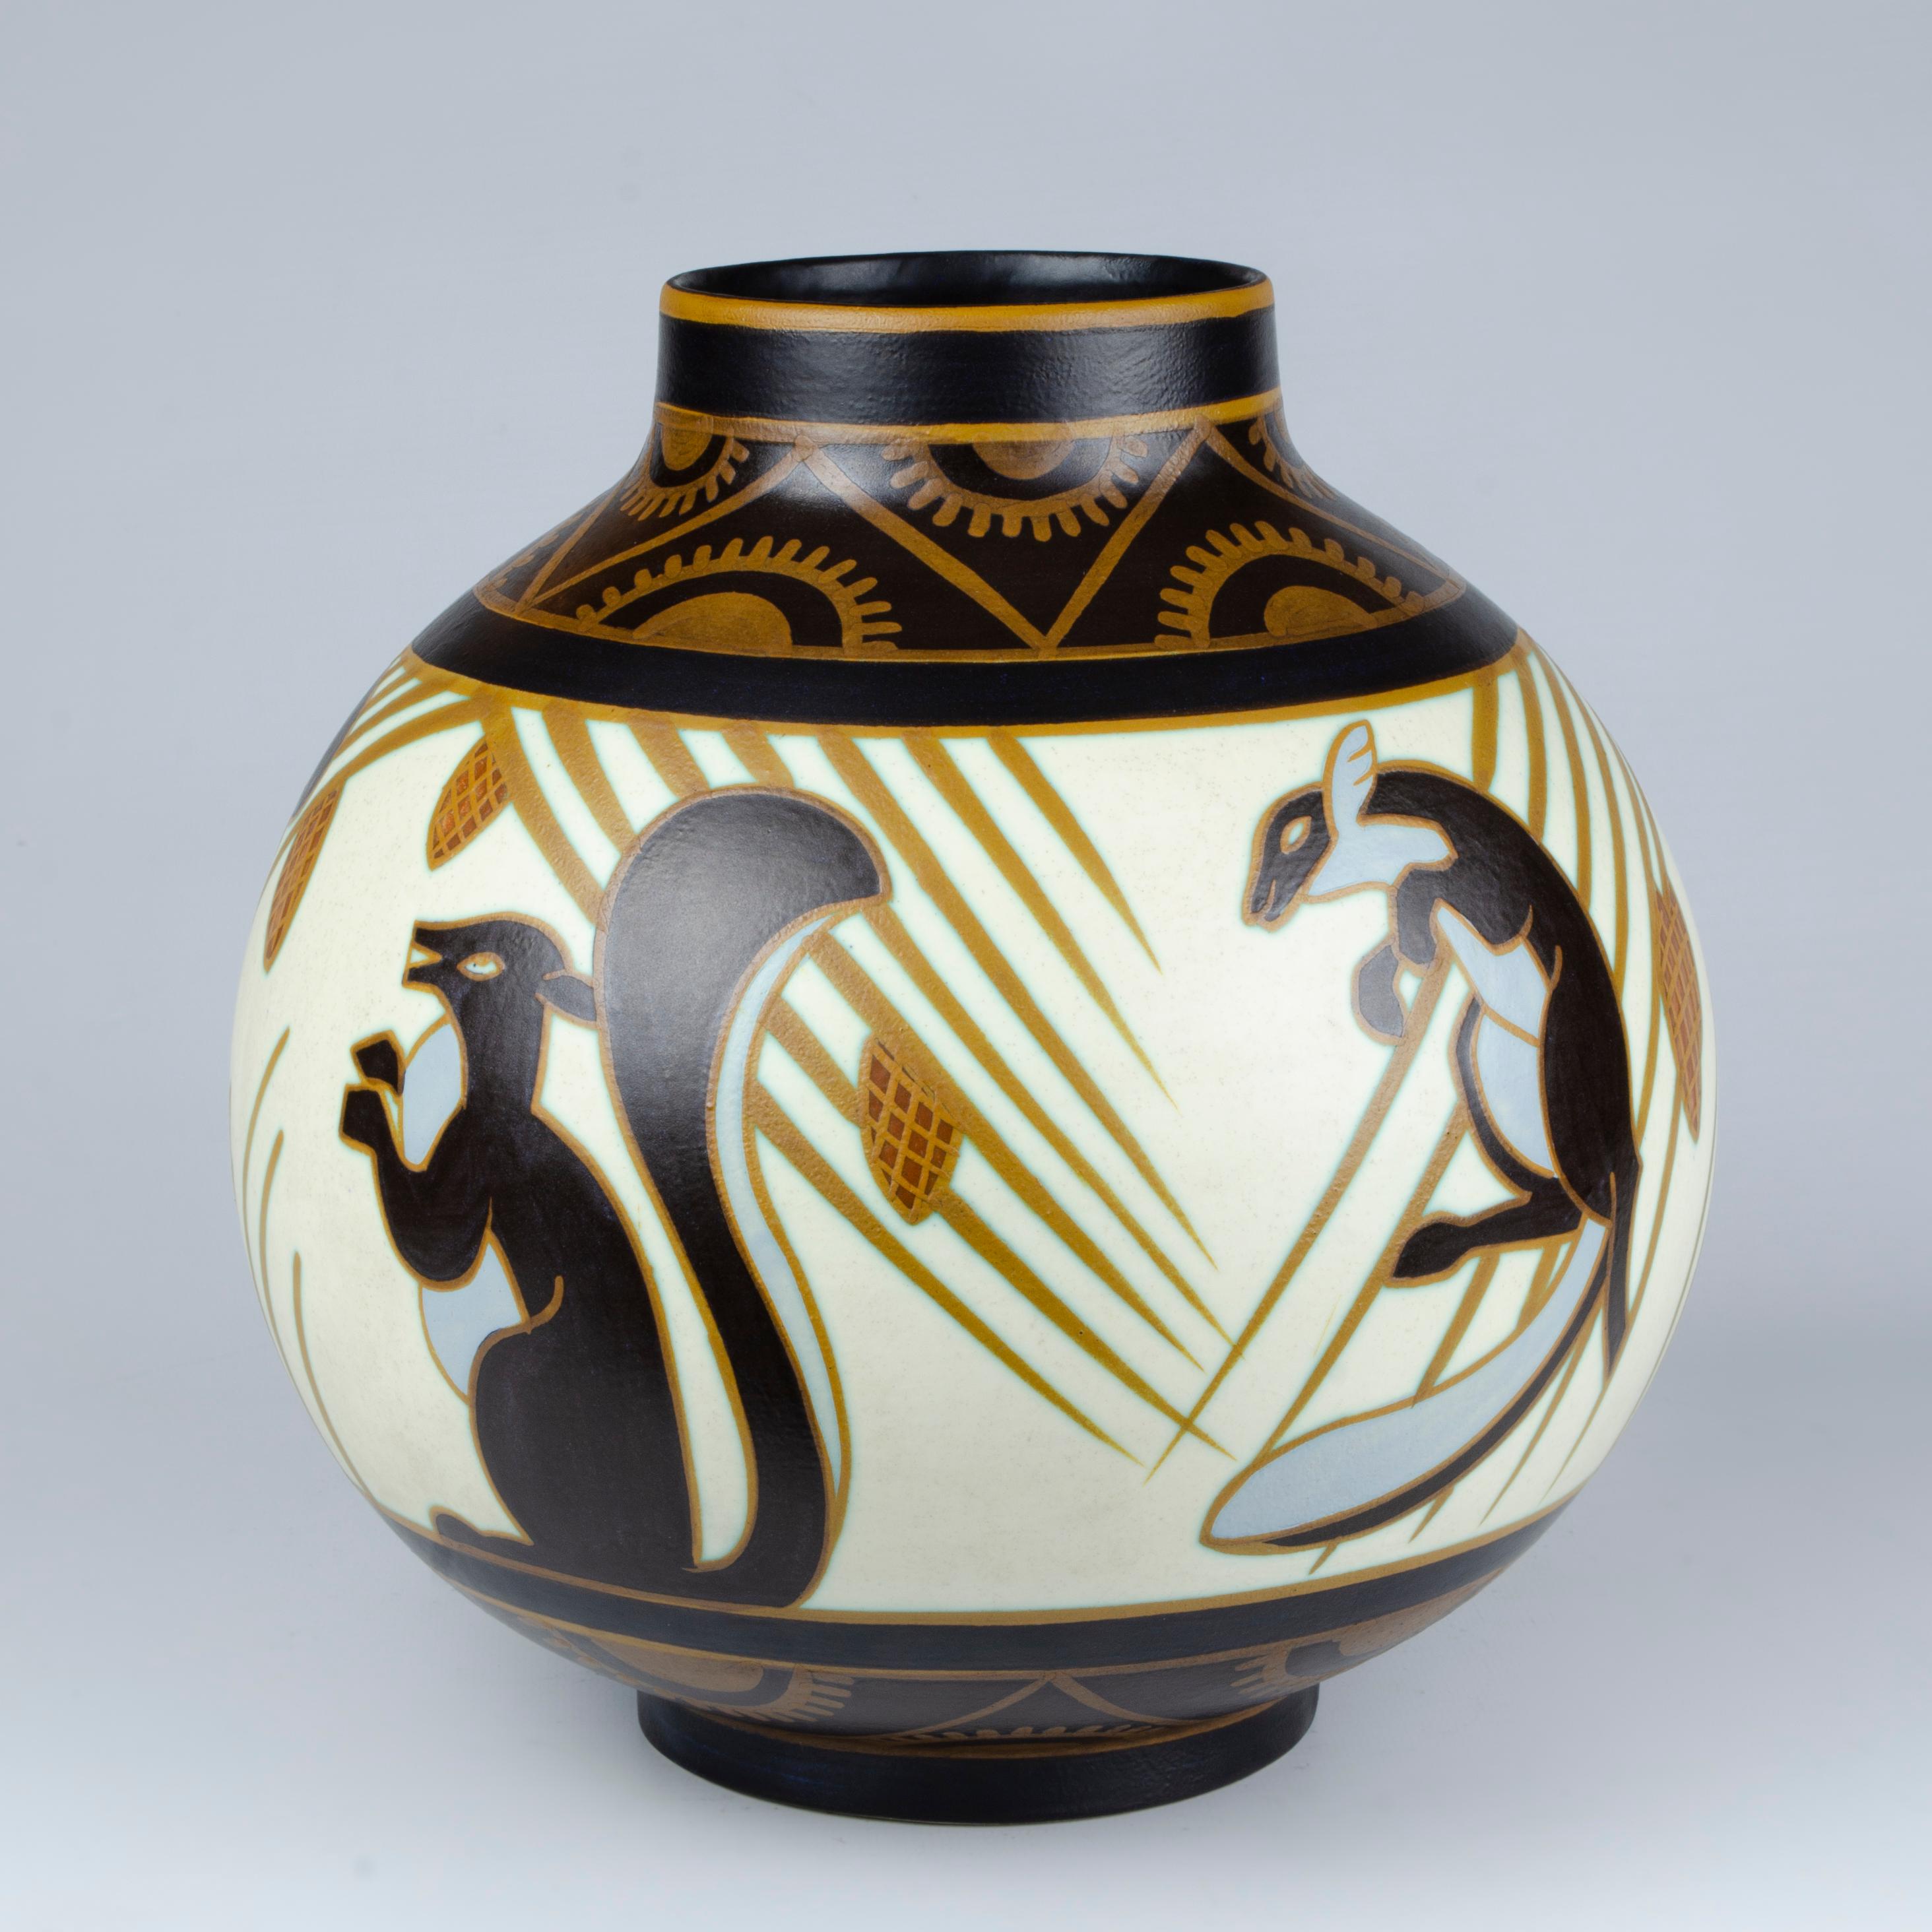 Ceramic vase with a squirrel design. Model 1349, made by Charles Catteau (1880-1966). Signed CH. Catteau, D.1349. Dochercres - Keramis - Made Belgium.

Belgium, CIRCA 1920.

Bibliography: 